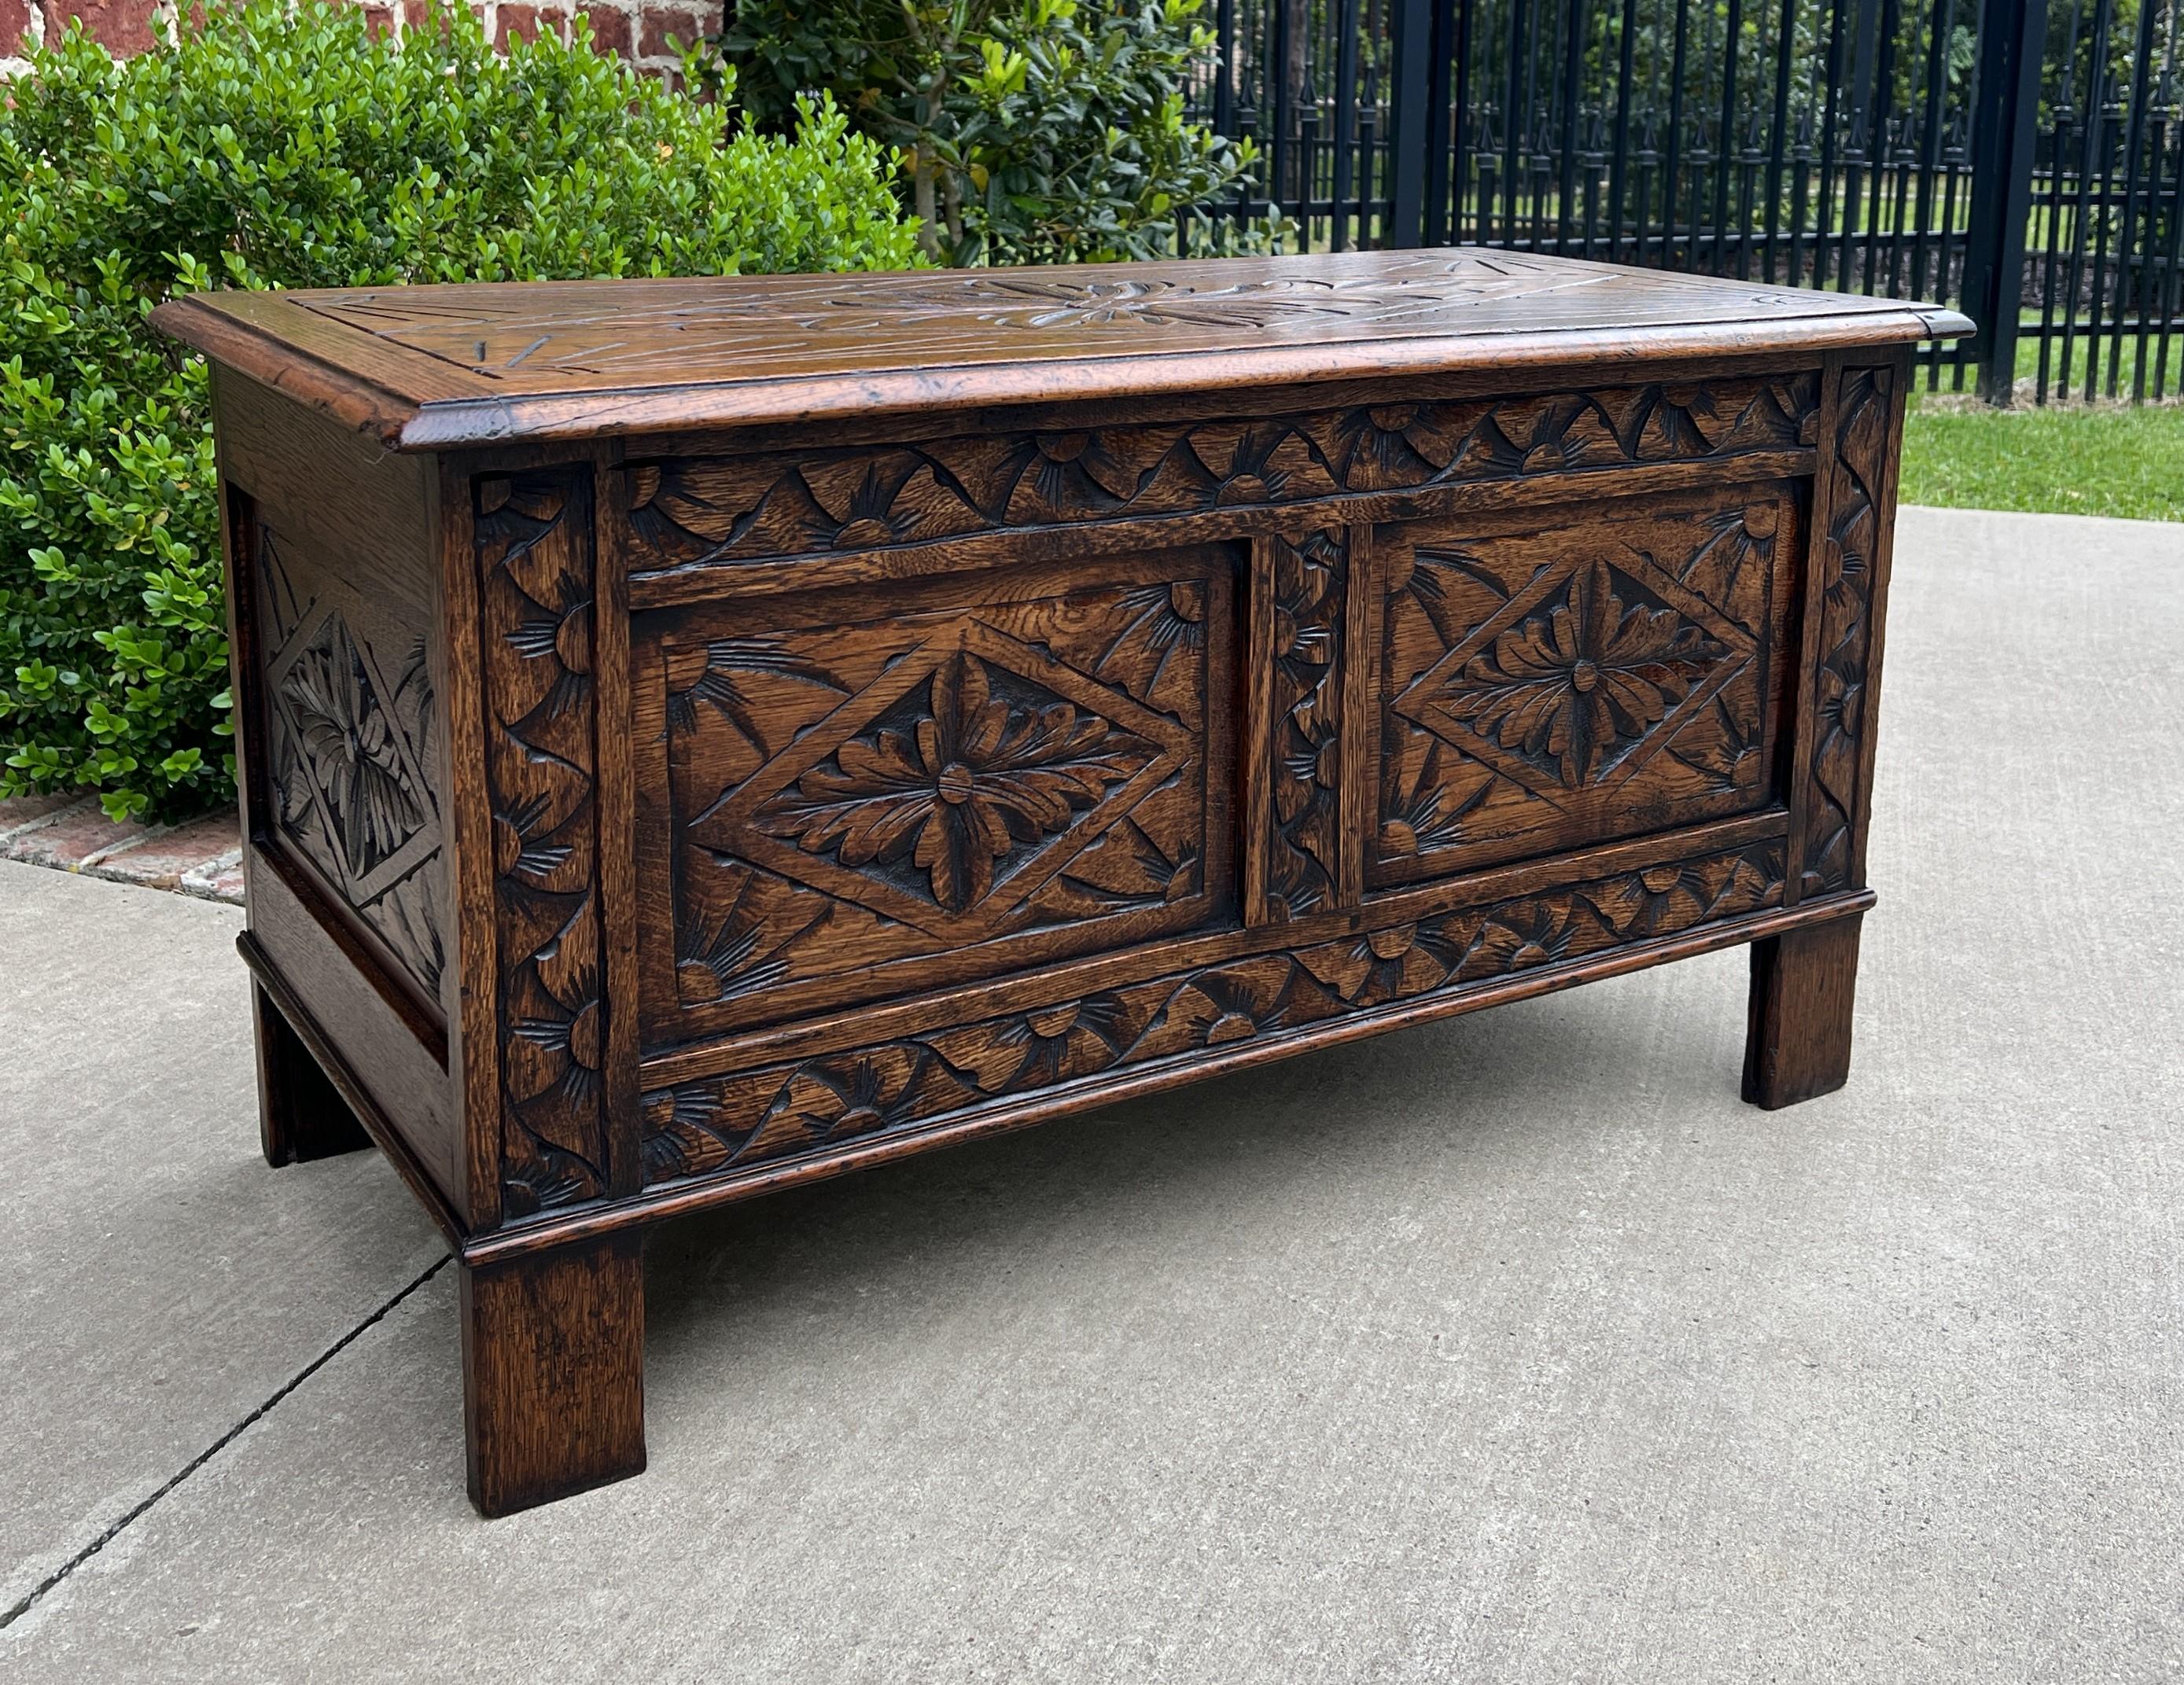 Carved Antique English Blanket Box Chest Trunk Coffee Table Storage Chest Coffer Oak